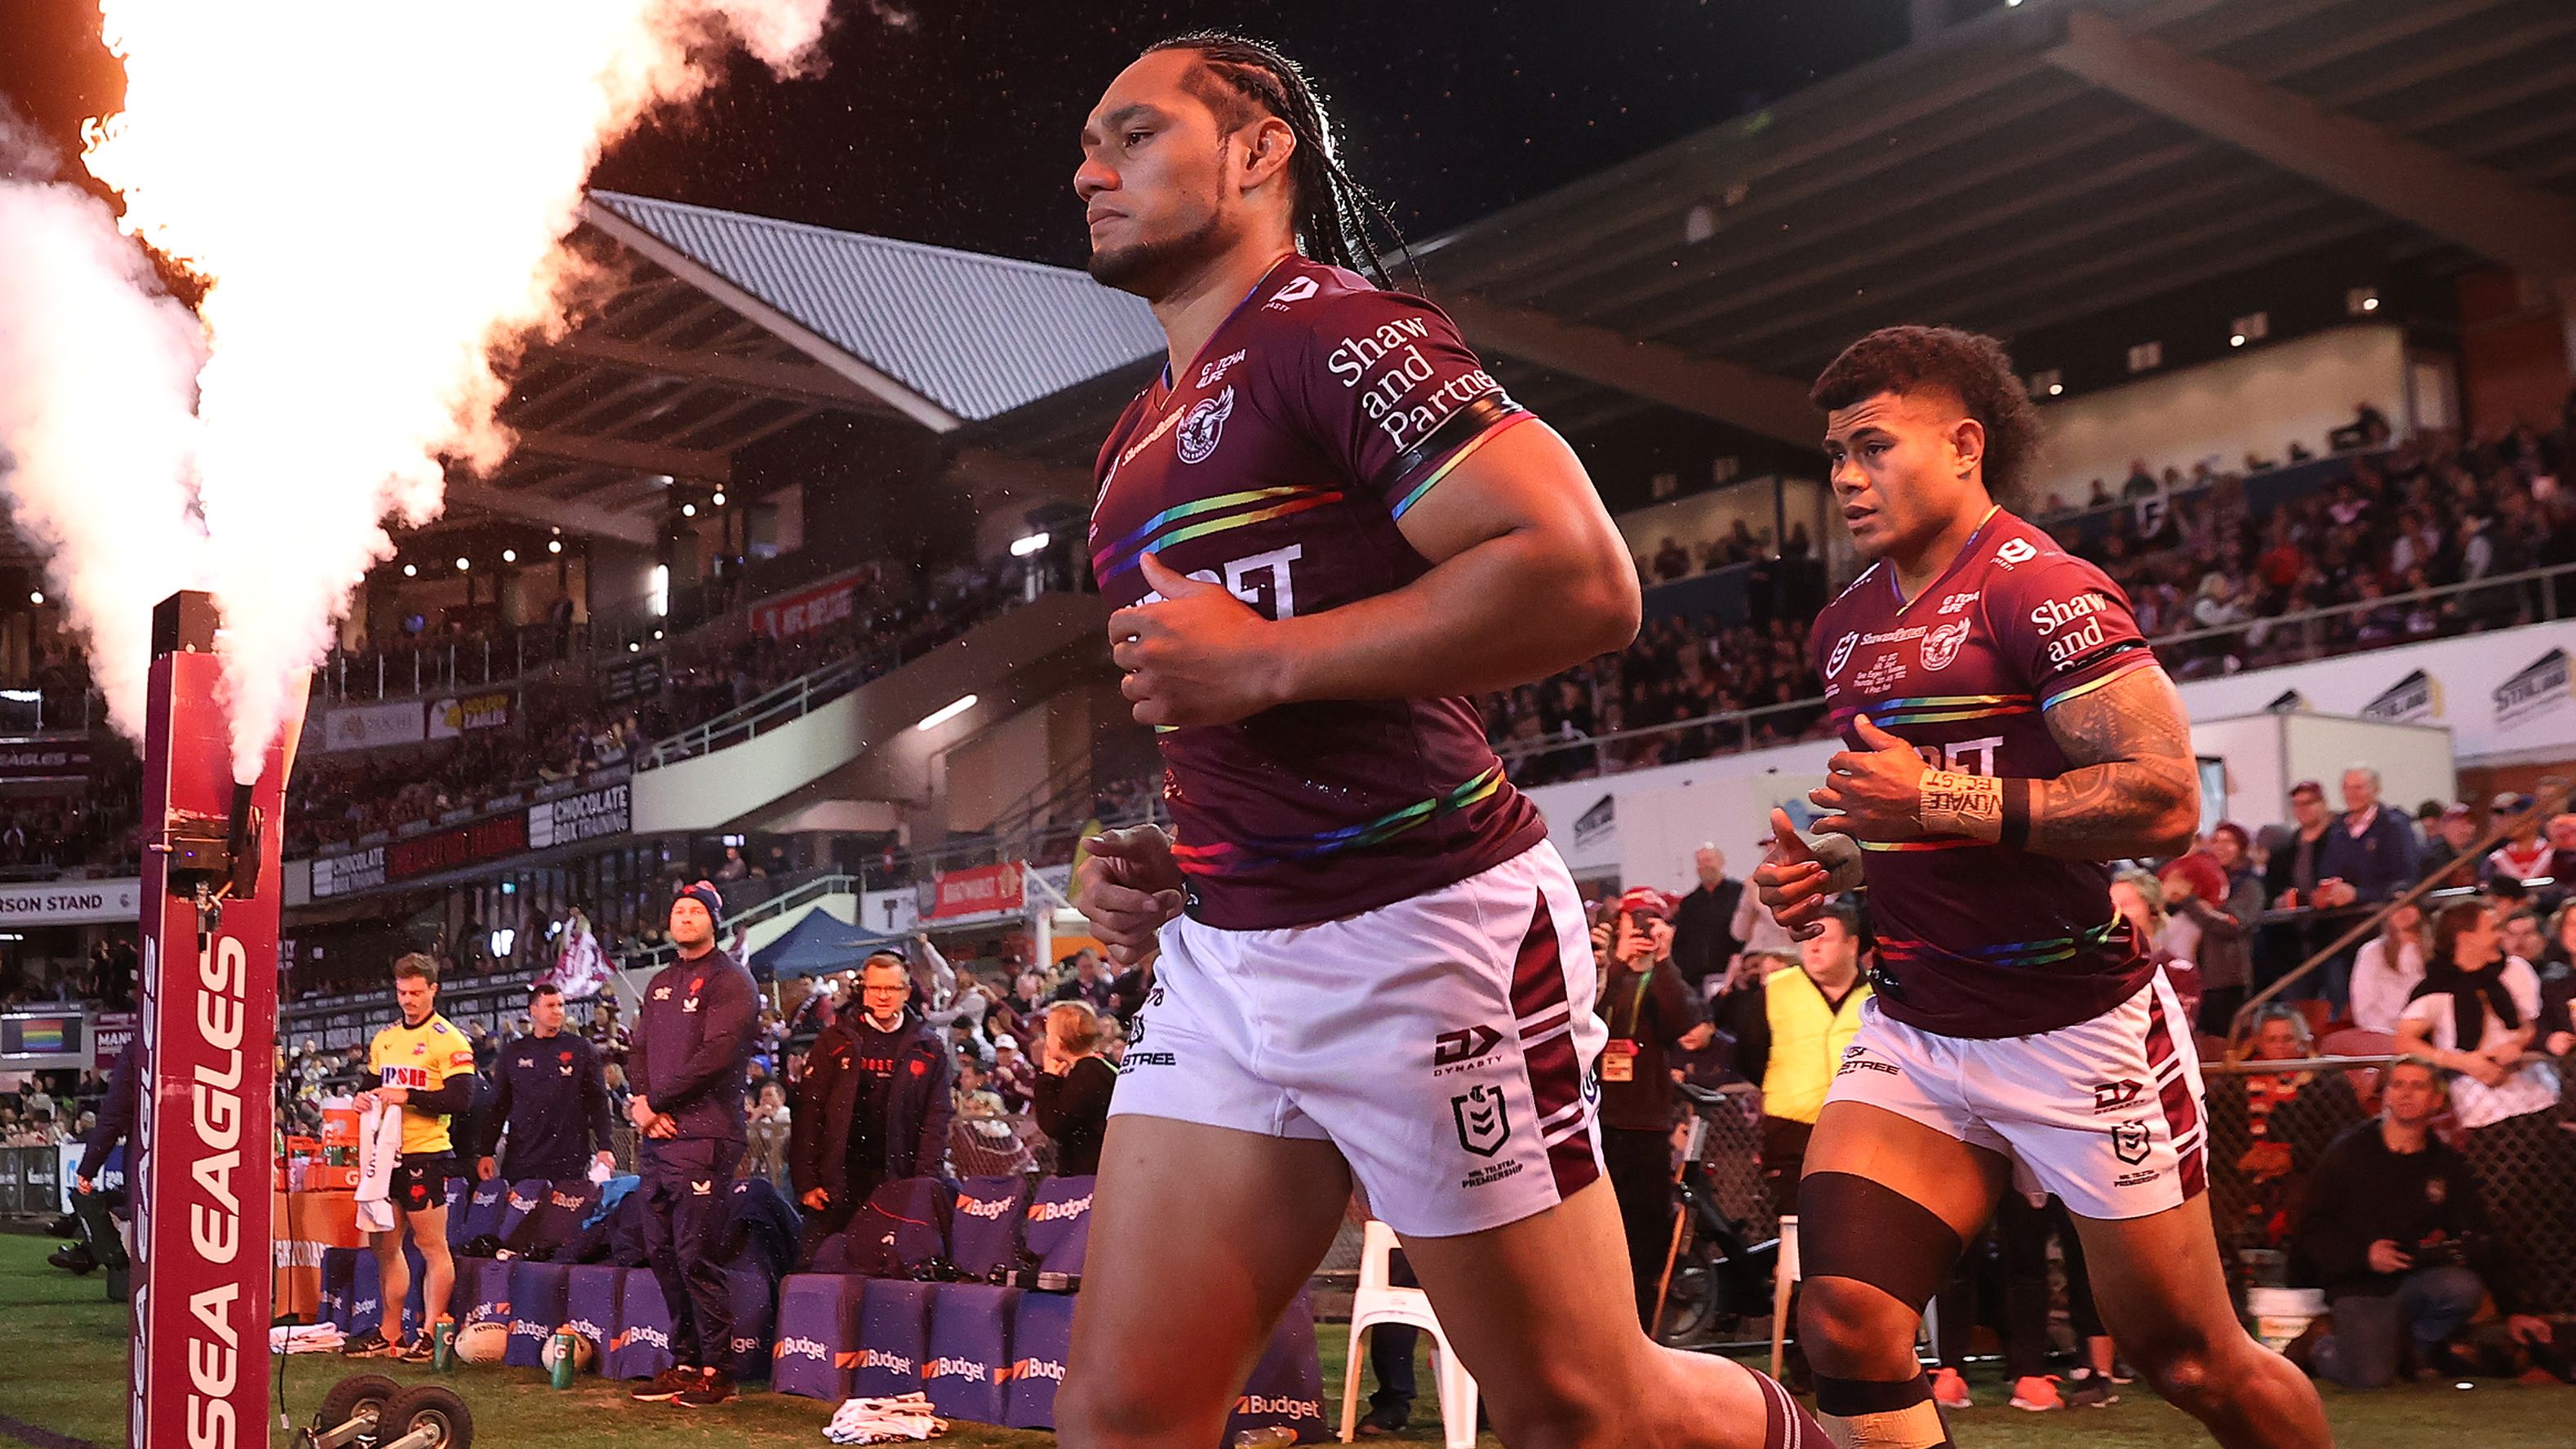 The Mole: Gay English player comes out of retirement in protest over Manly jersey saga